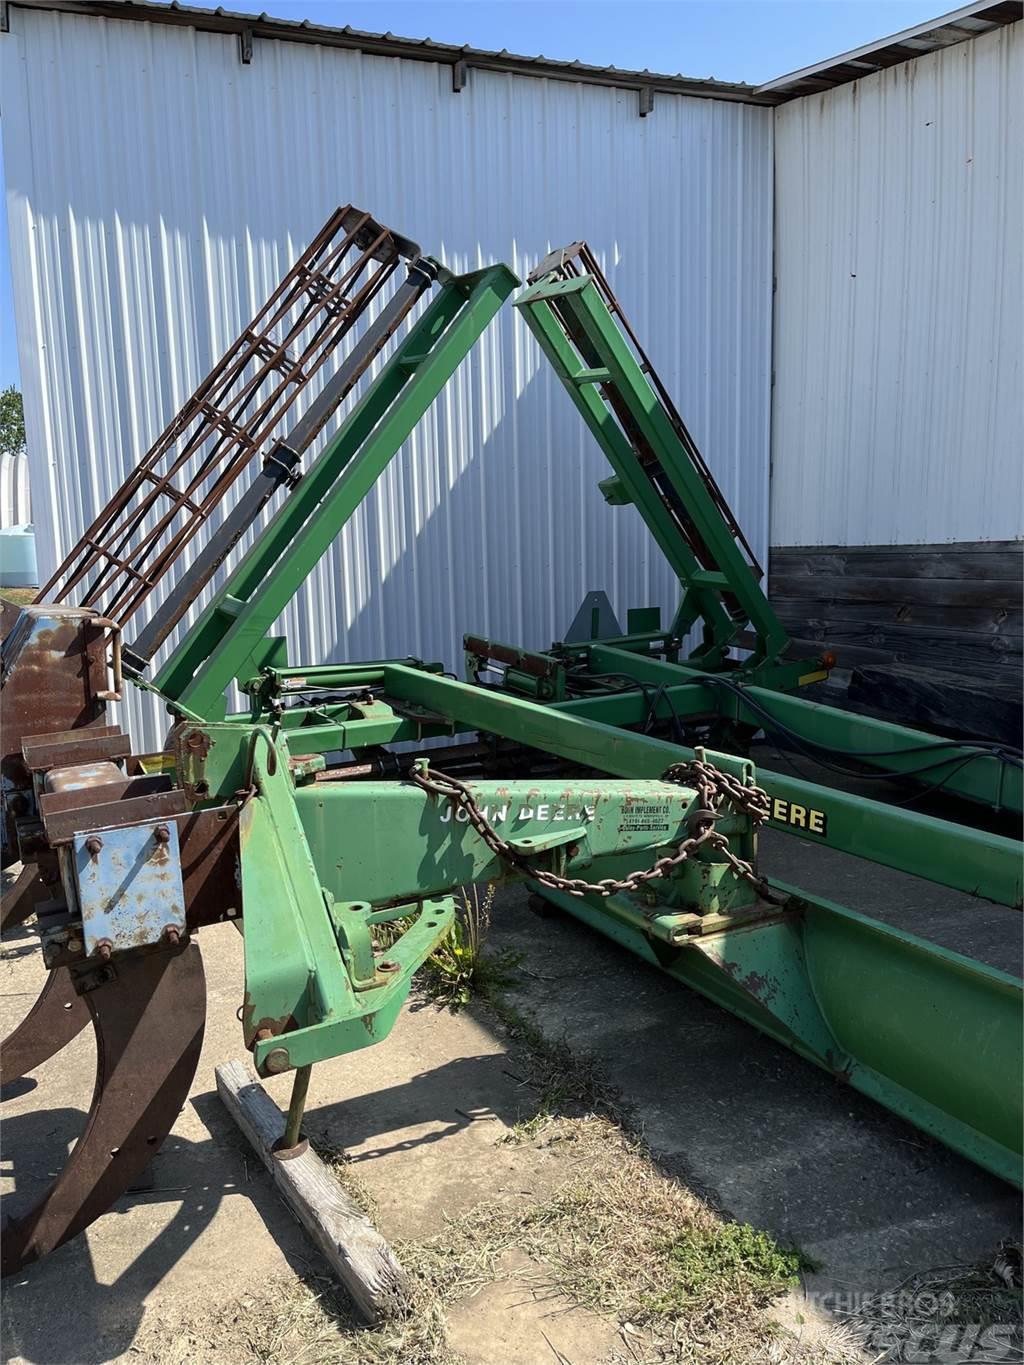 John Deere 200 Other tillage machines and accessories